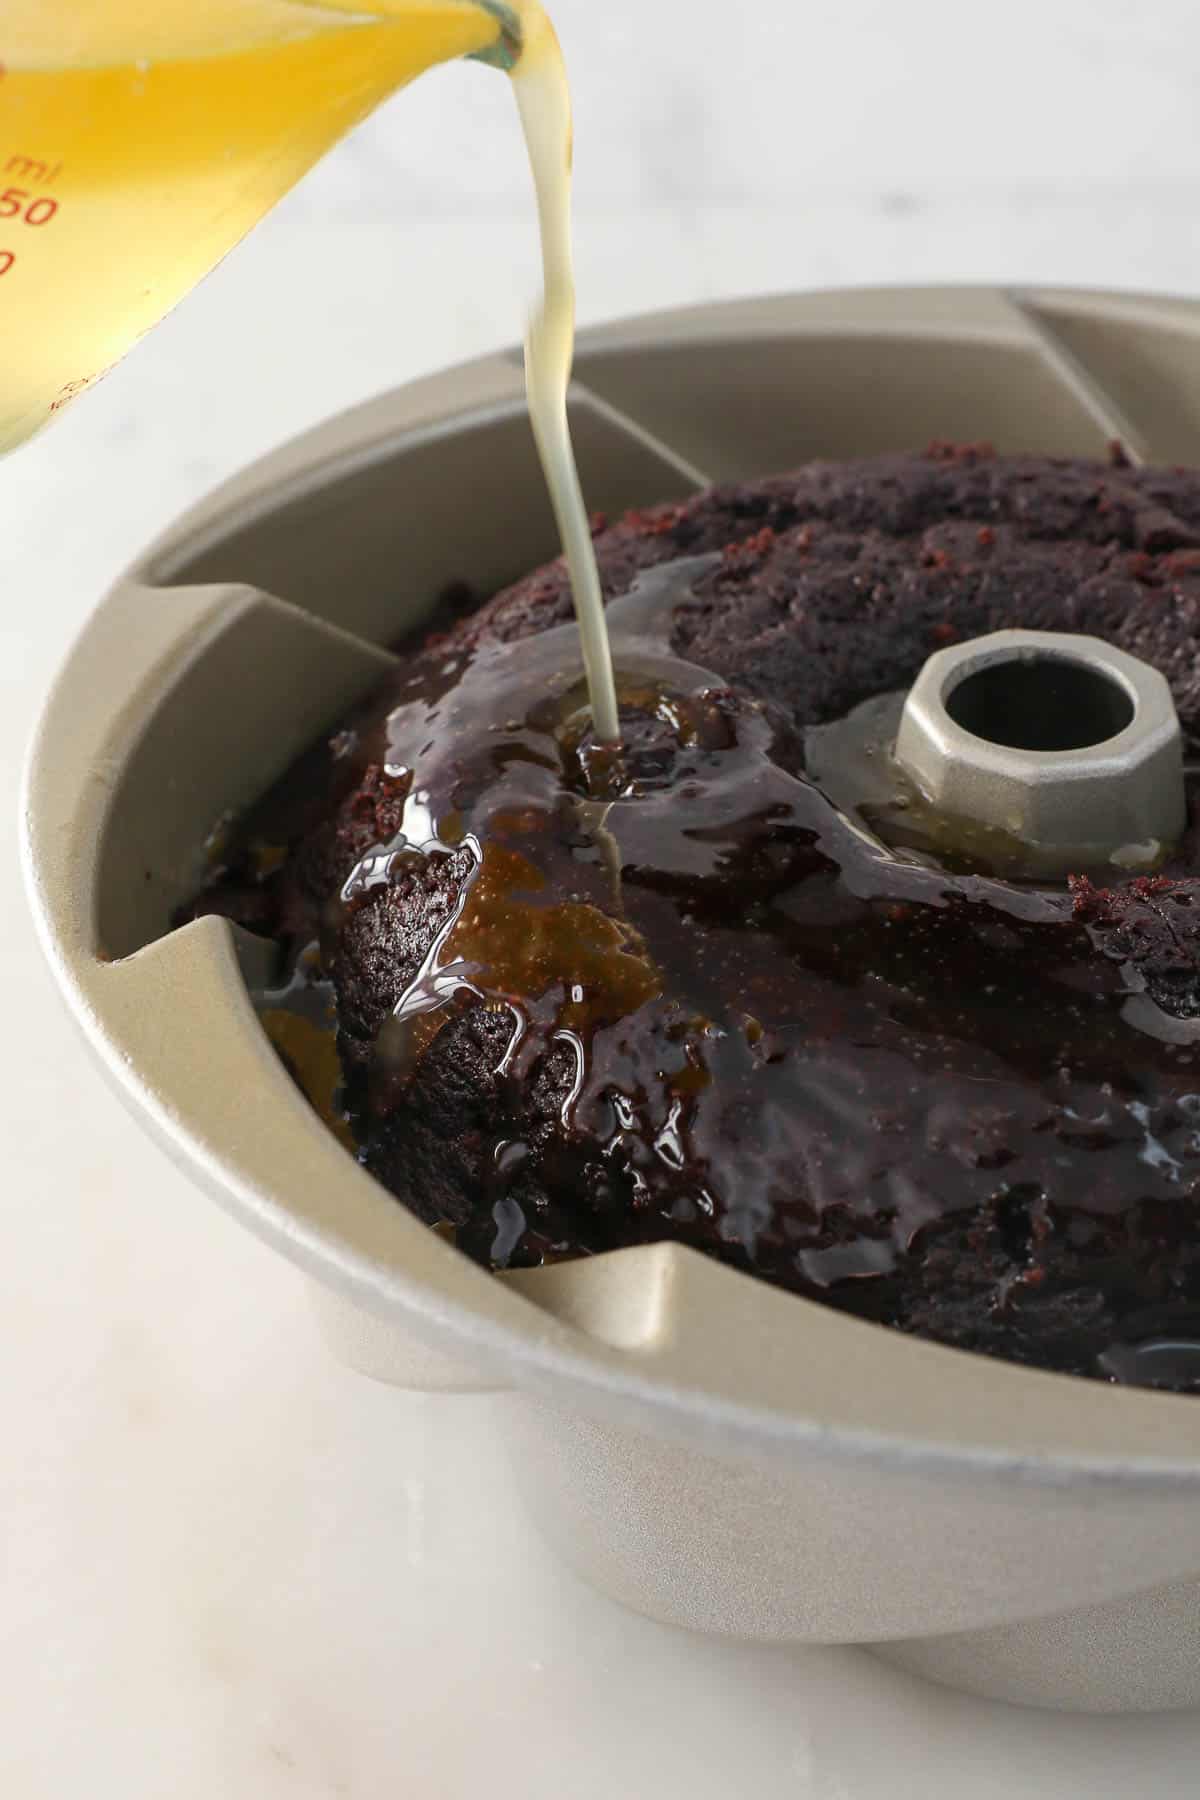 Rum glaze being poured over the top of a chocolate cake in a bundt pan